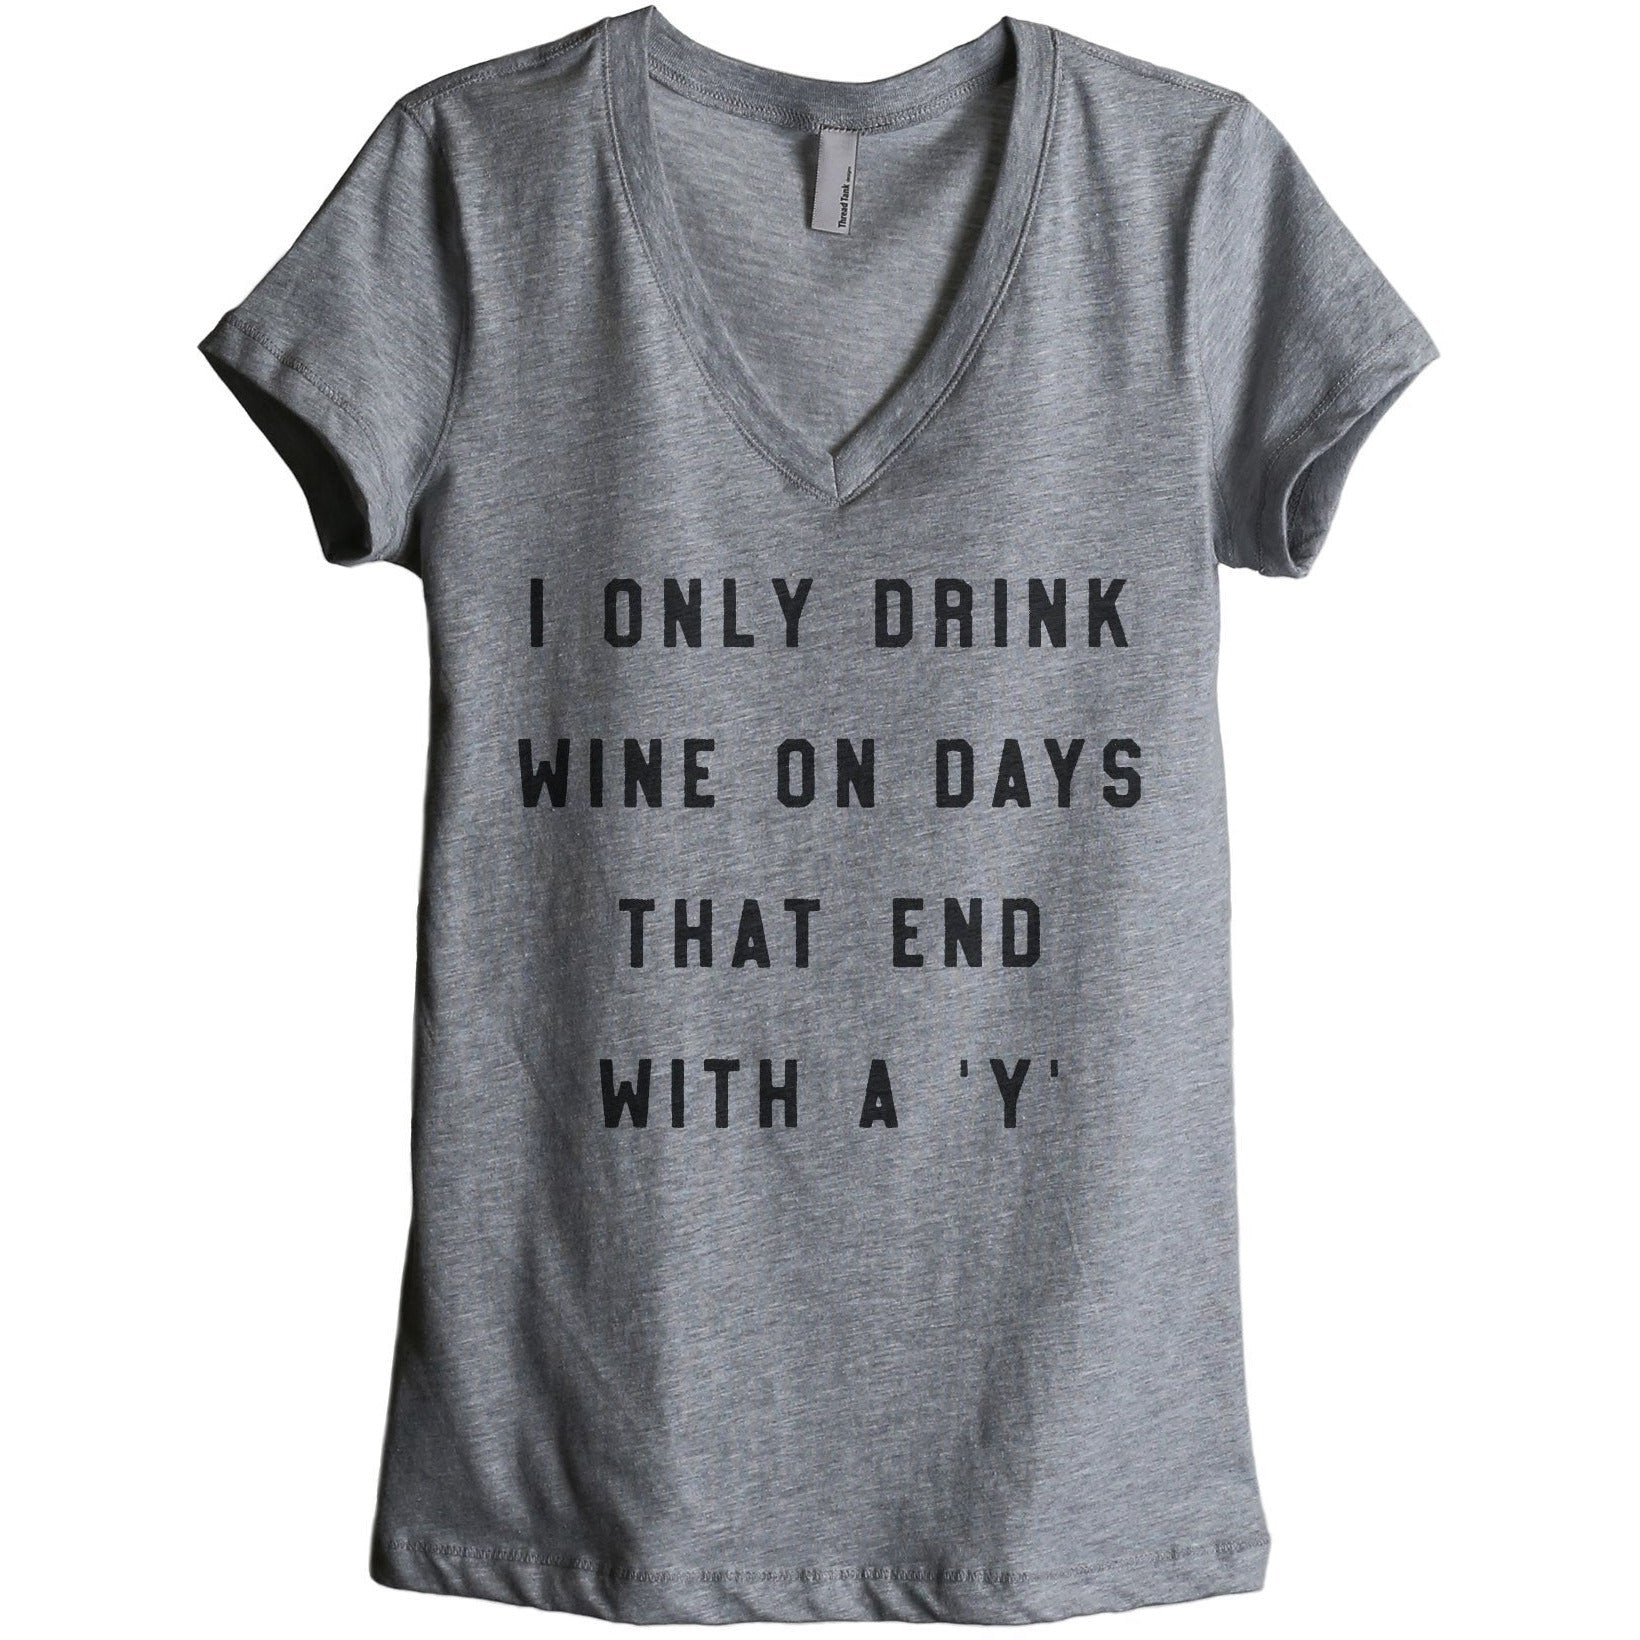 Drink Wine On Days Ends With Y Women's Relaxed Crewneck T-Shirt Top Tee Heather Grey